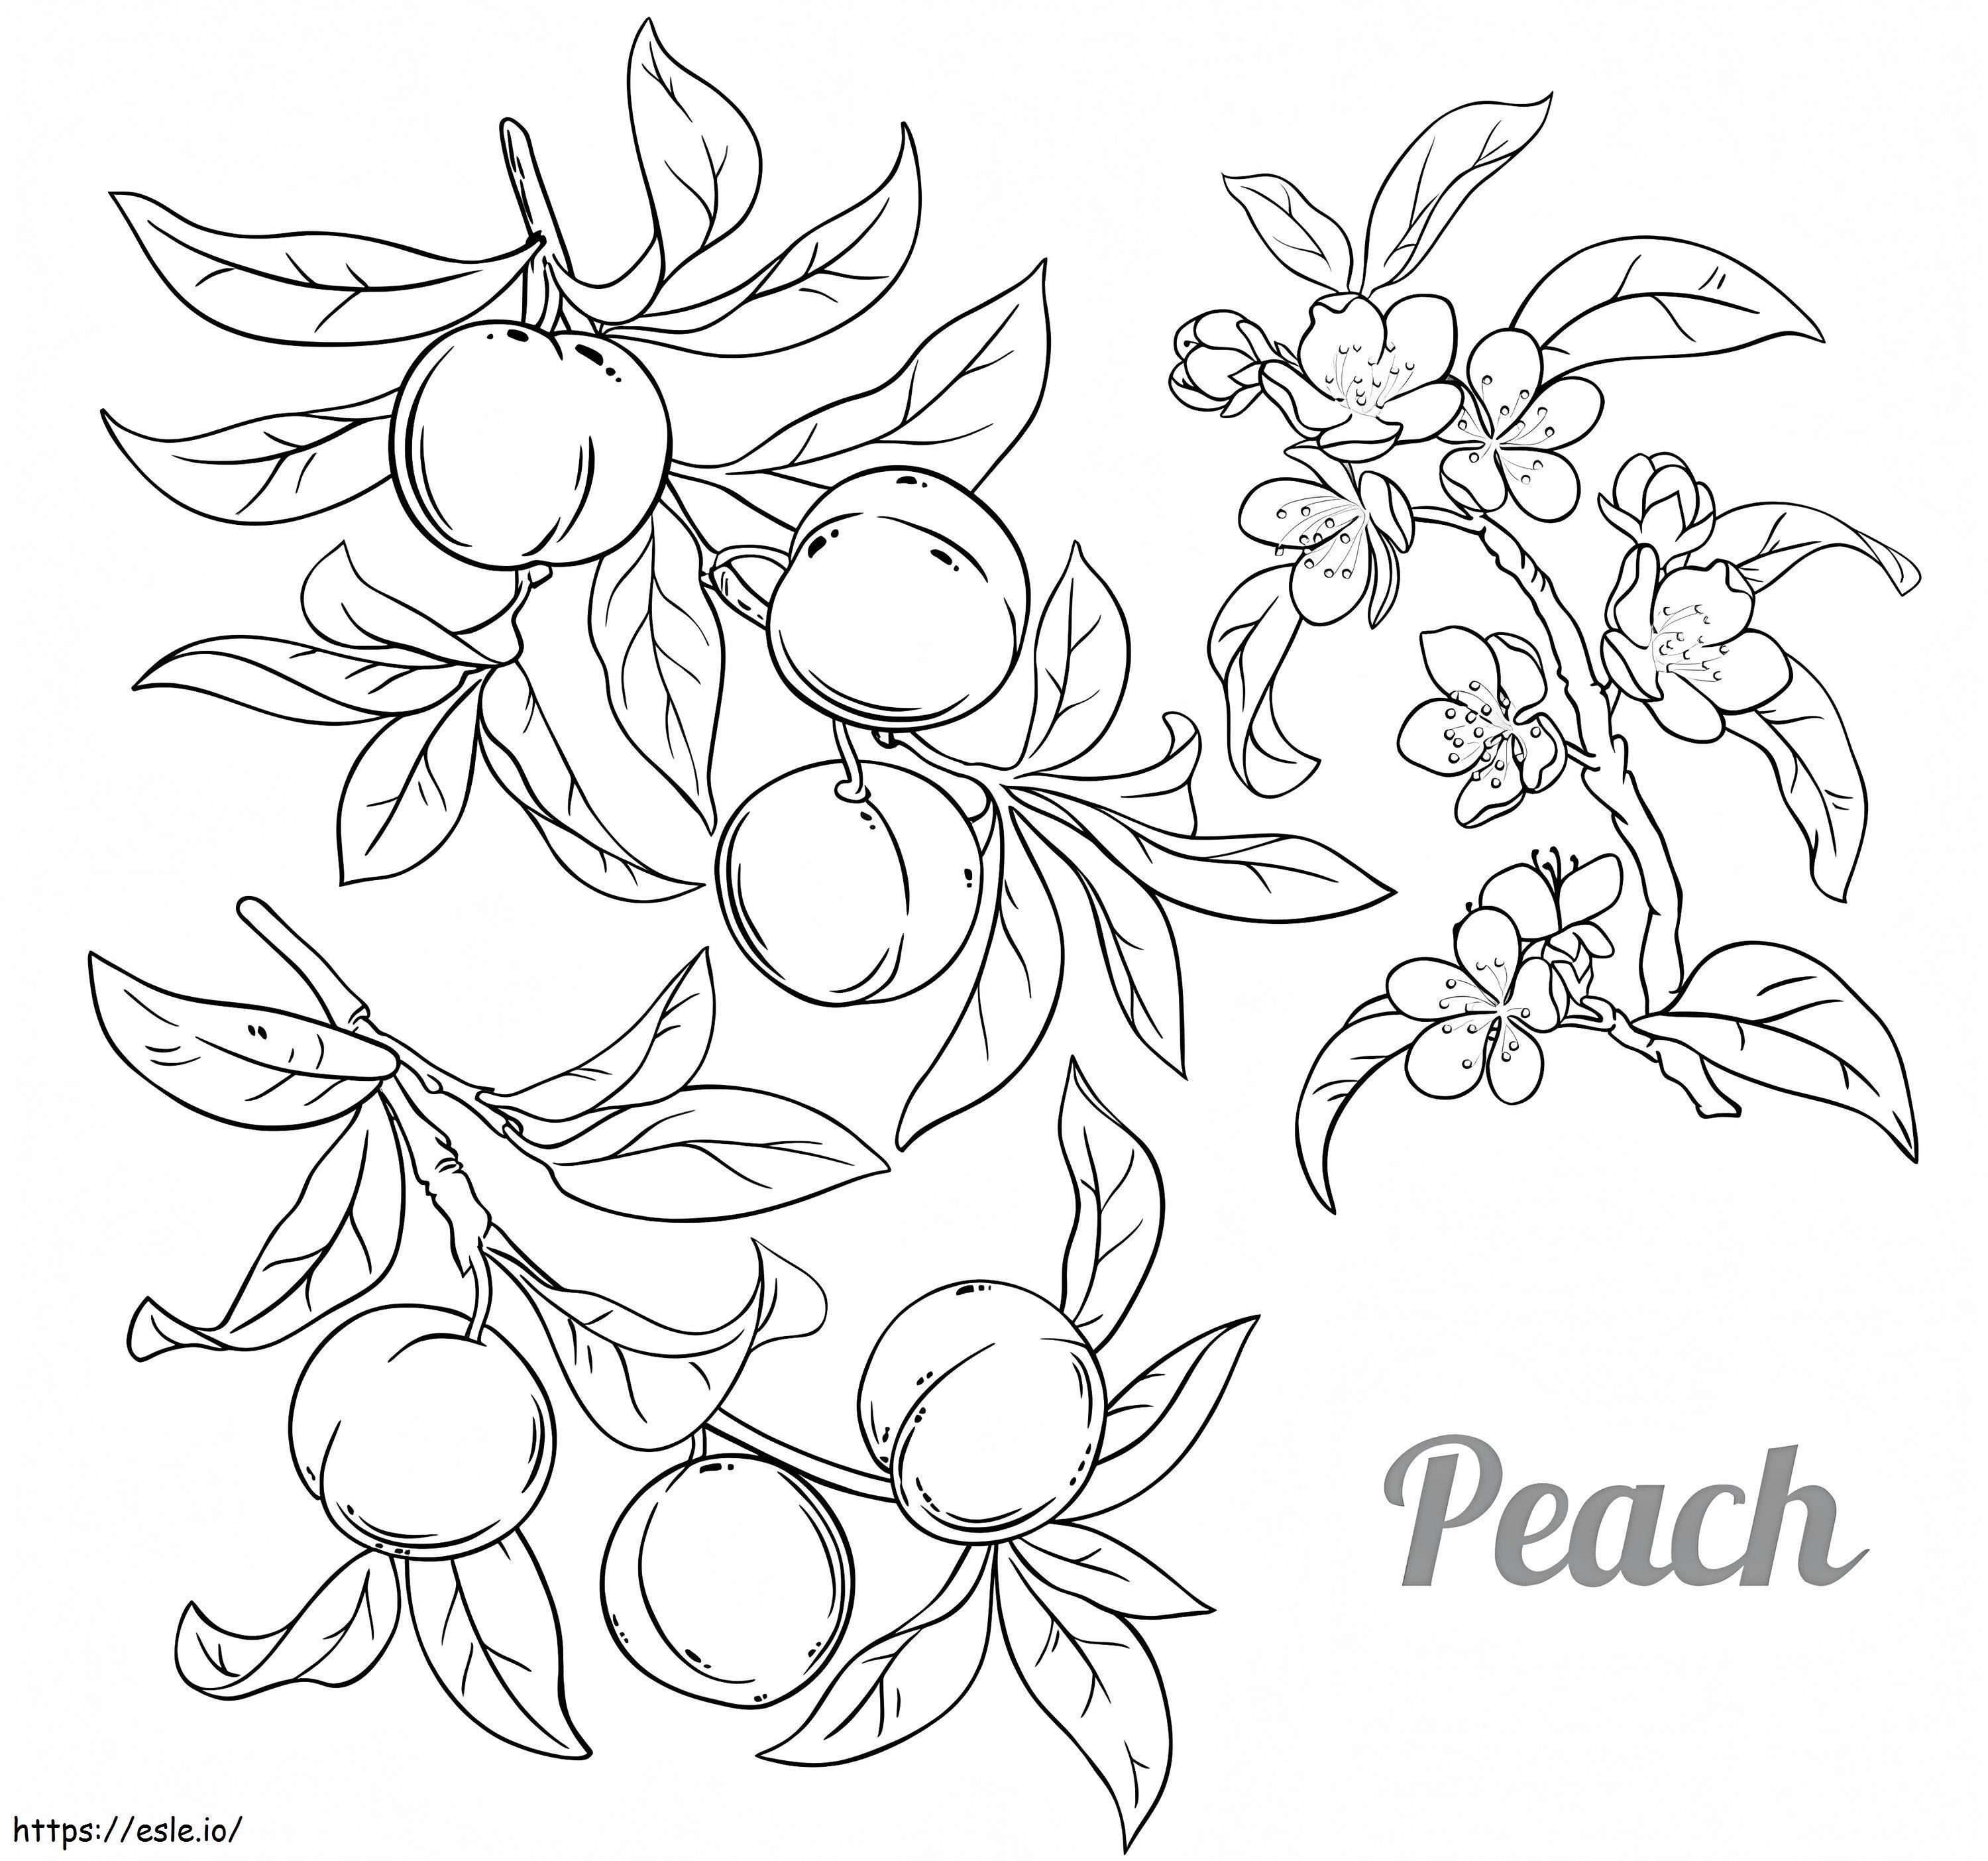 Peaches coloring page